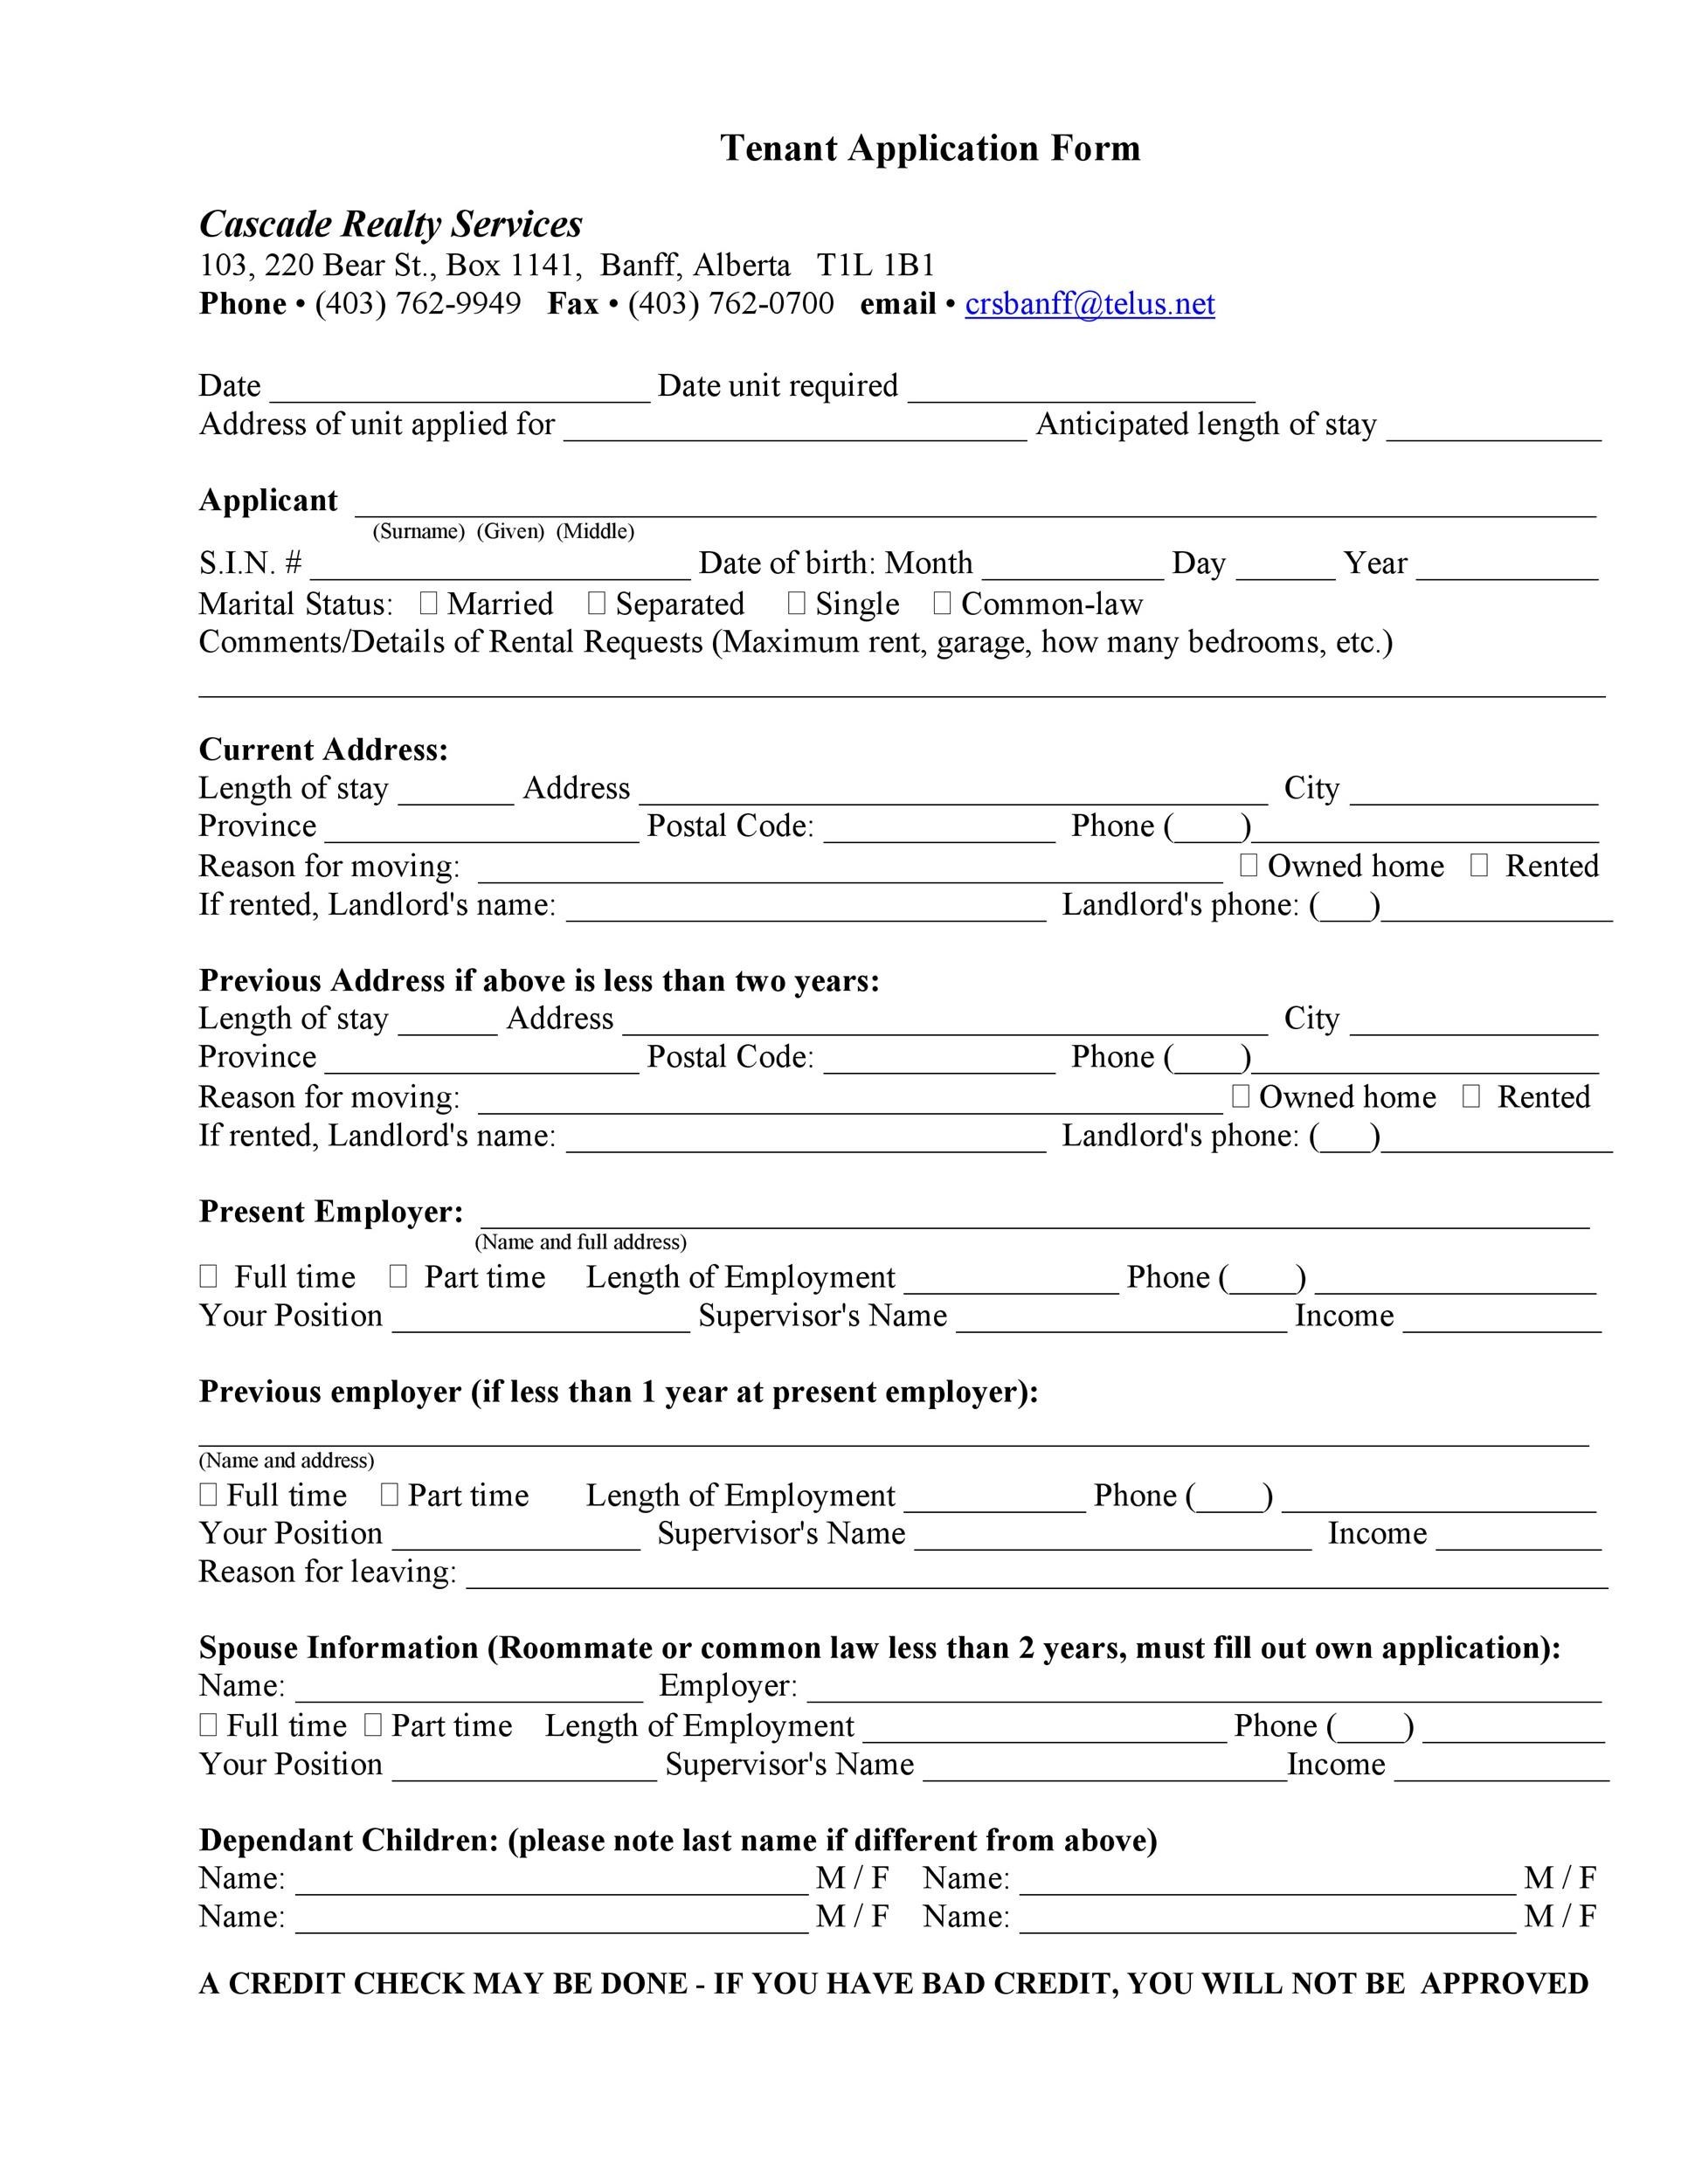 42 Simple Rental Application Forms 100 FREE TemplateLab